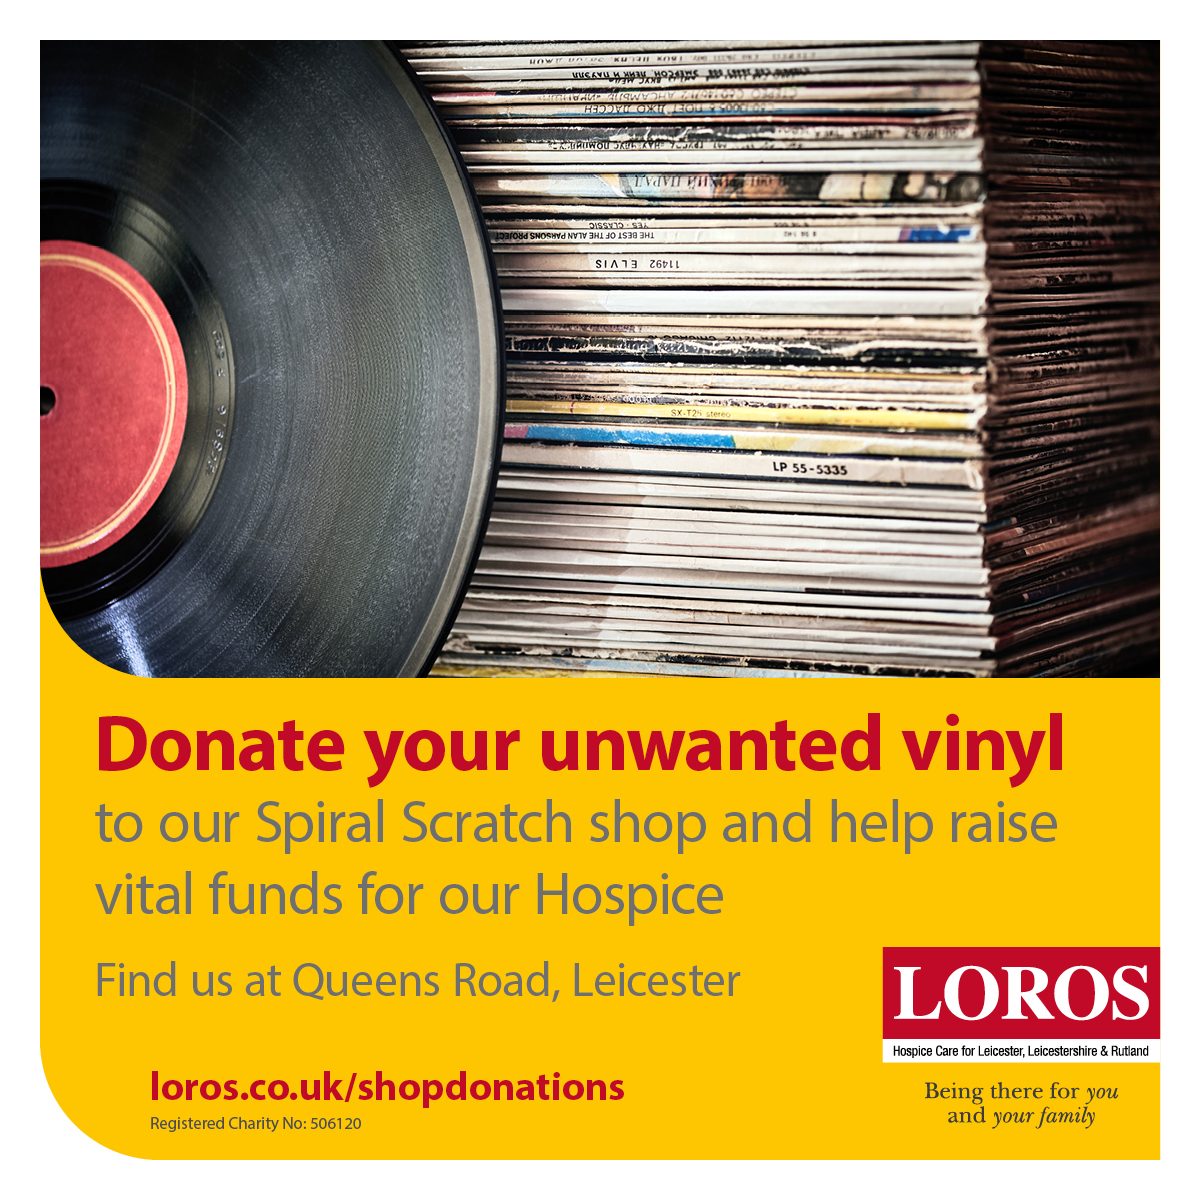 Calling all vinyl lovers! 🎶 Got some gems gathering dust? Donate them to us and let the music spin on! Our collection needs a boost, and we'd be so grateful for any donations. Find out more about Spiral Scratch opening times at: loros.co.uk/shops/spiral-s…. 🛍️